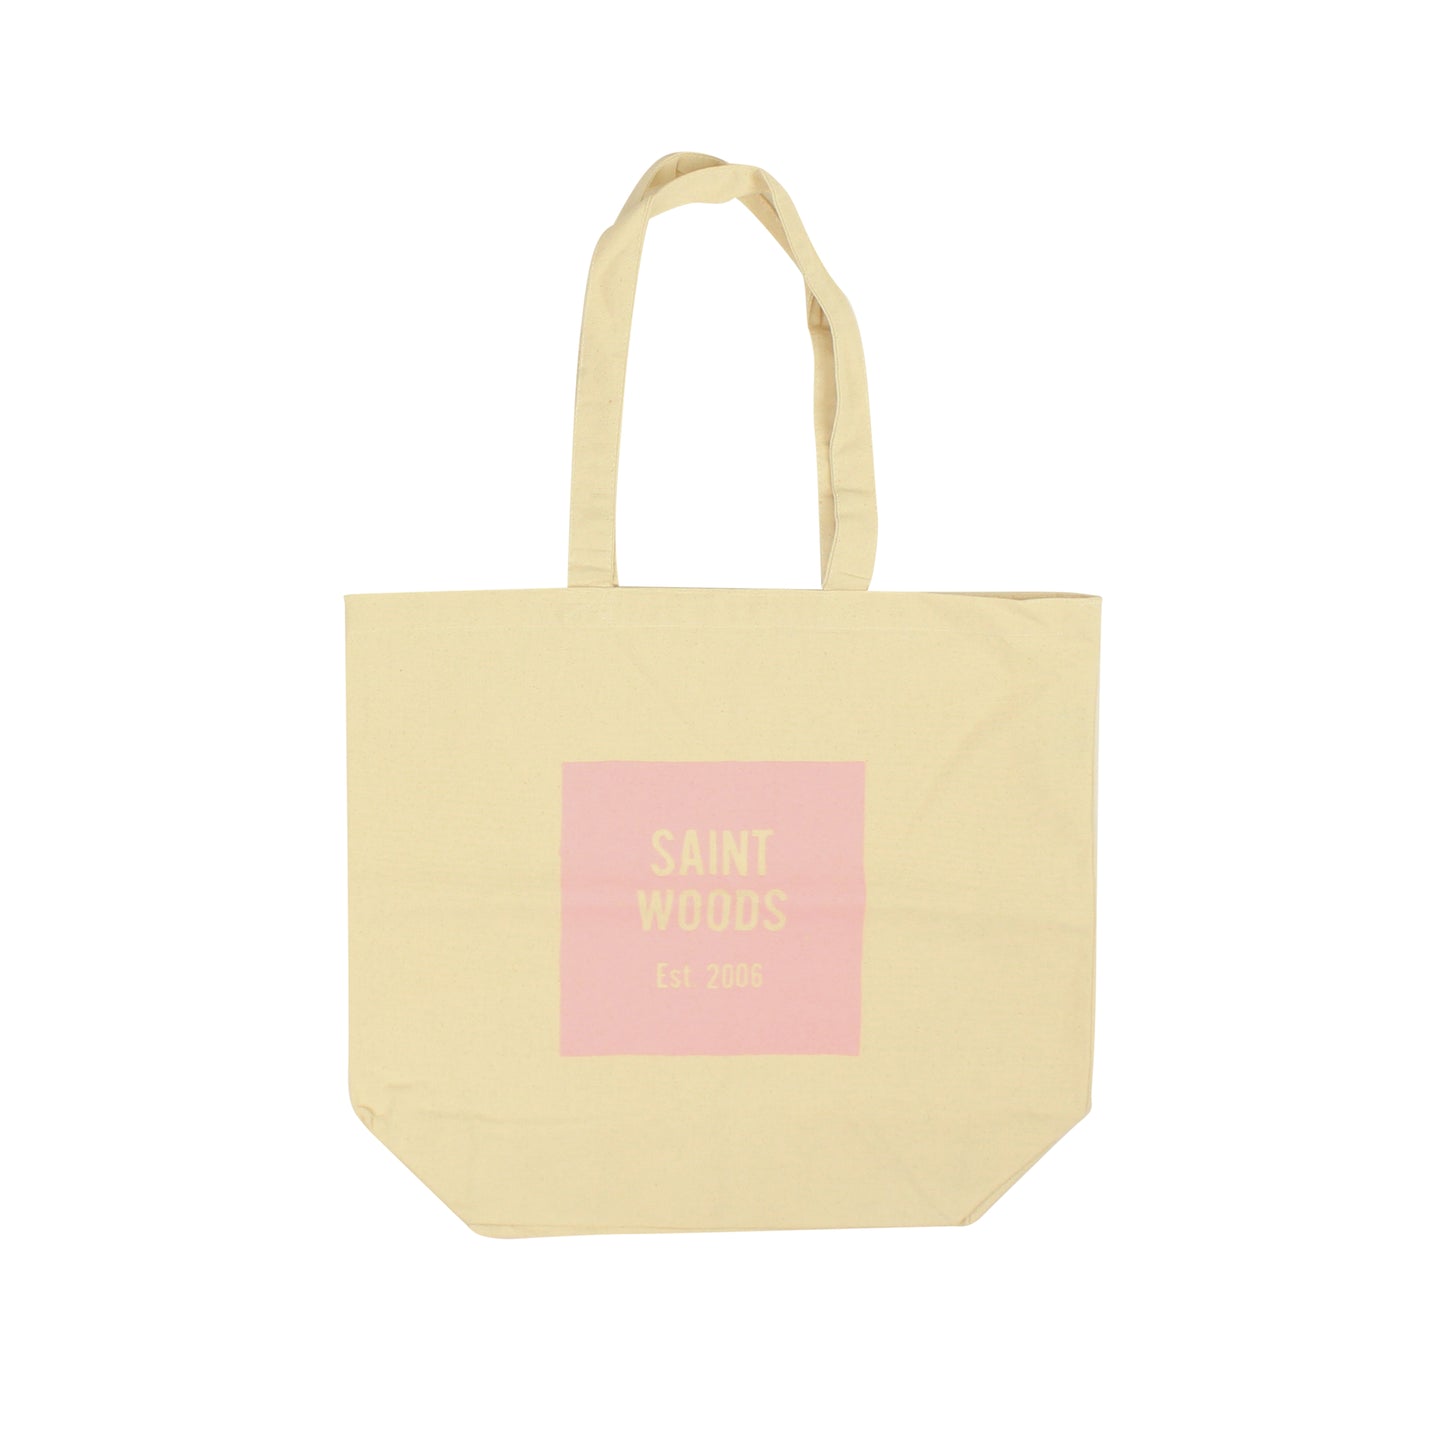 Saintwoods Sw & Oc Tote On Canvas - Pink